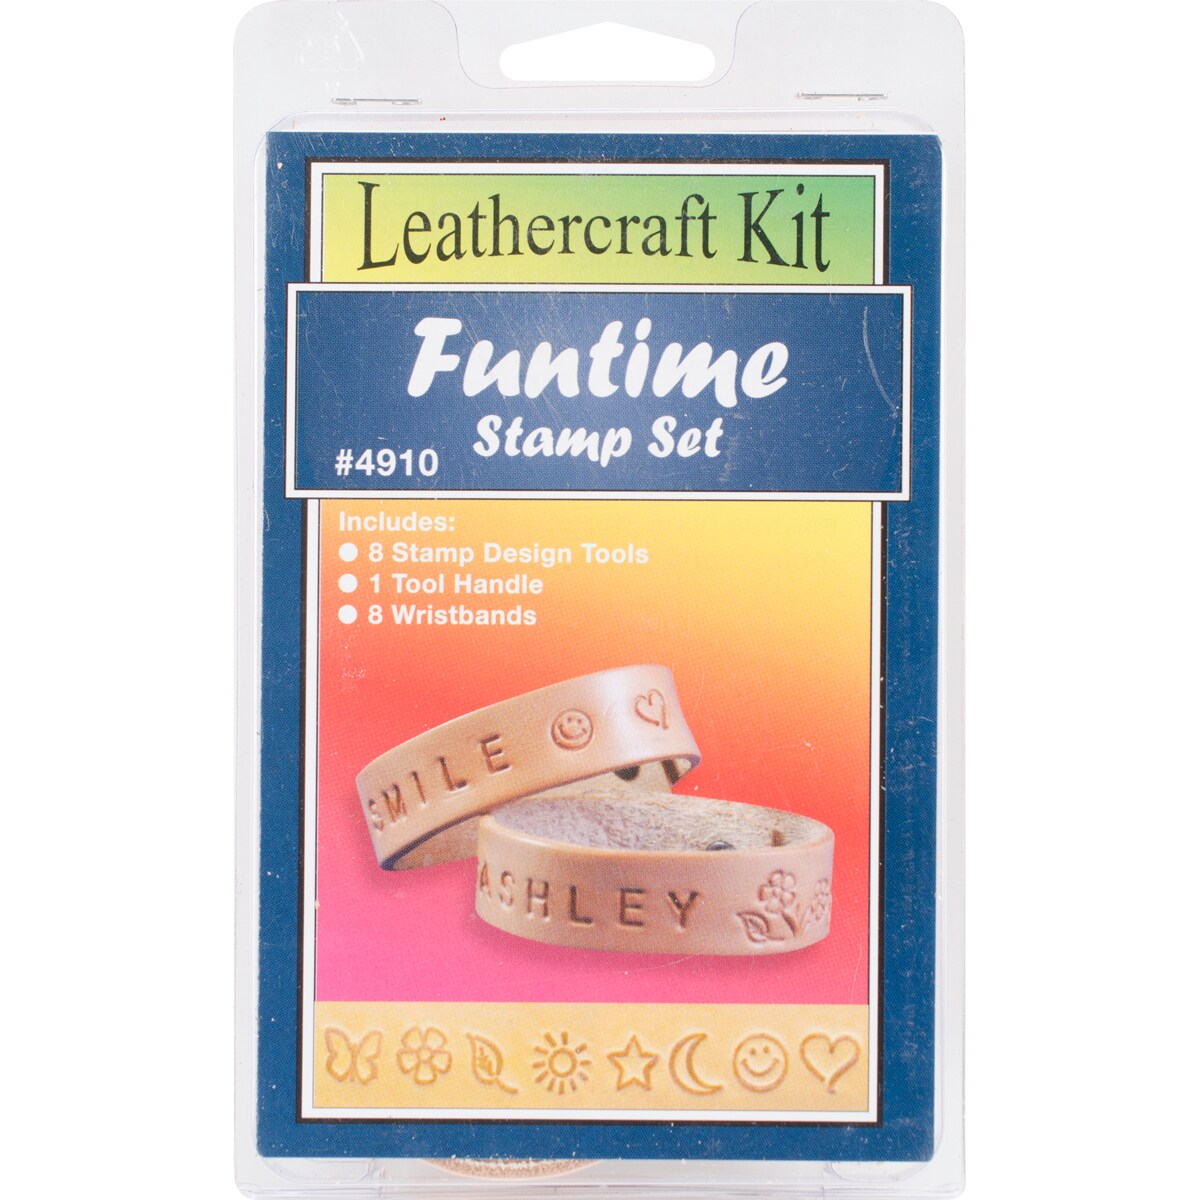 Realeather(R) Crafts Funtime Stamp Set w/ Wristbands-Funtime Stamp Set